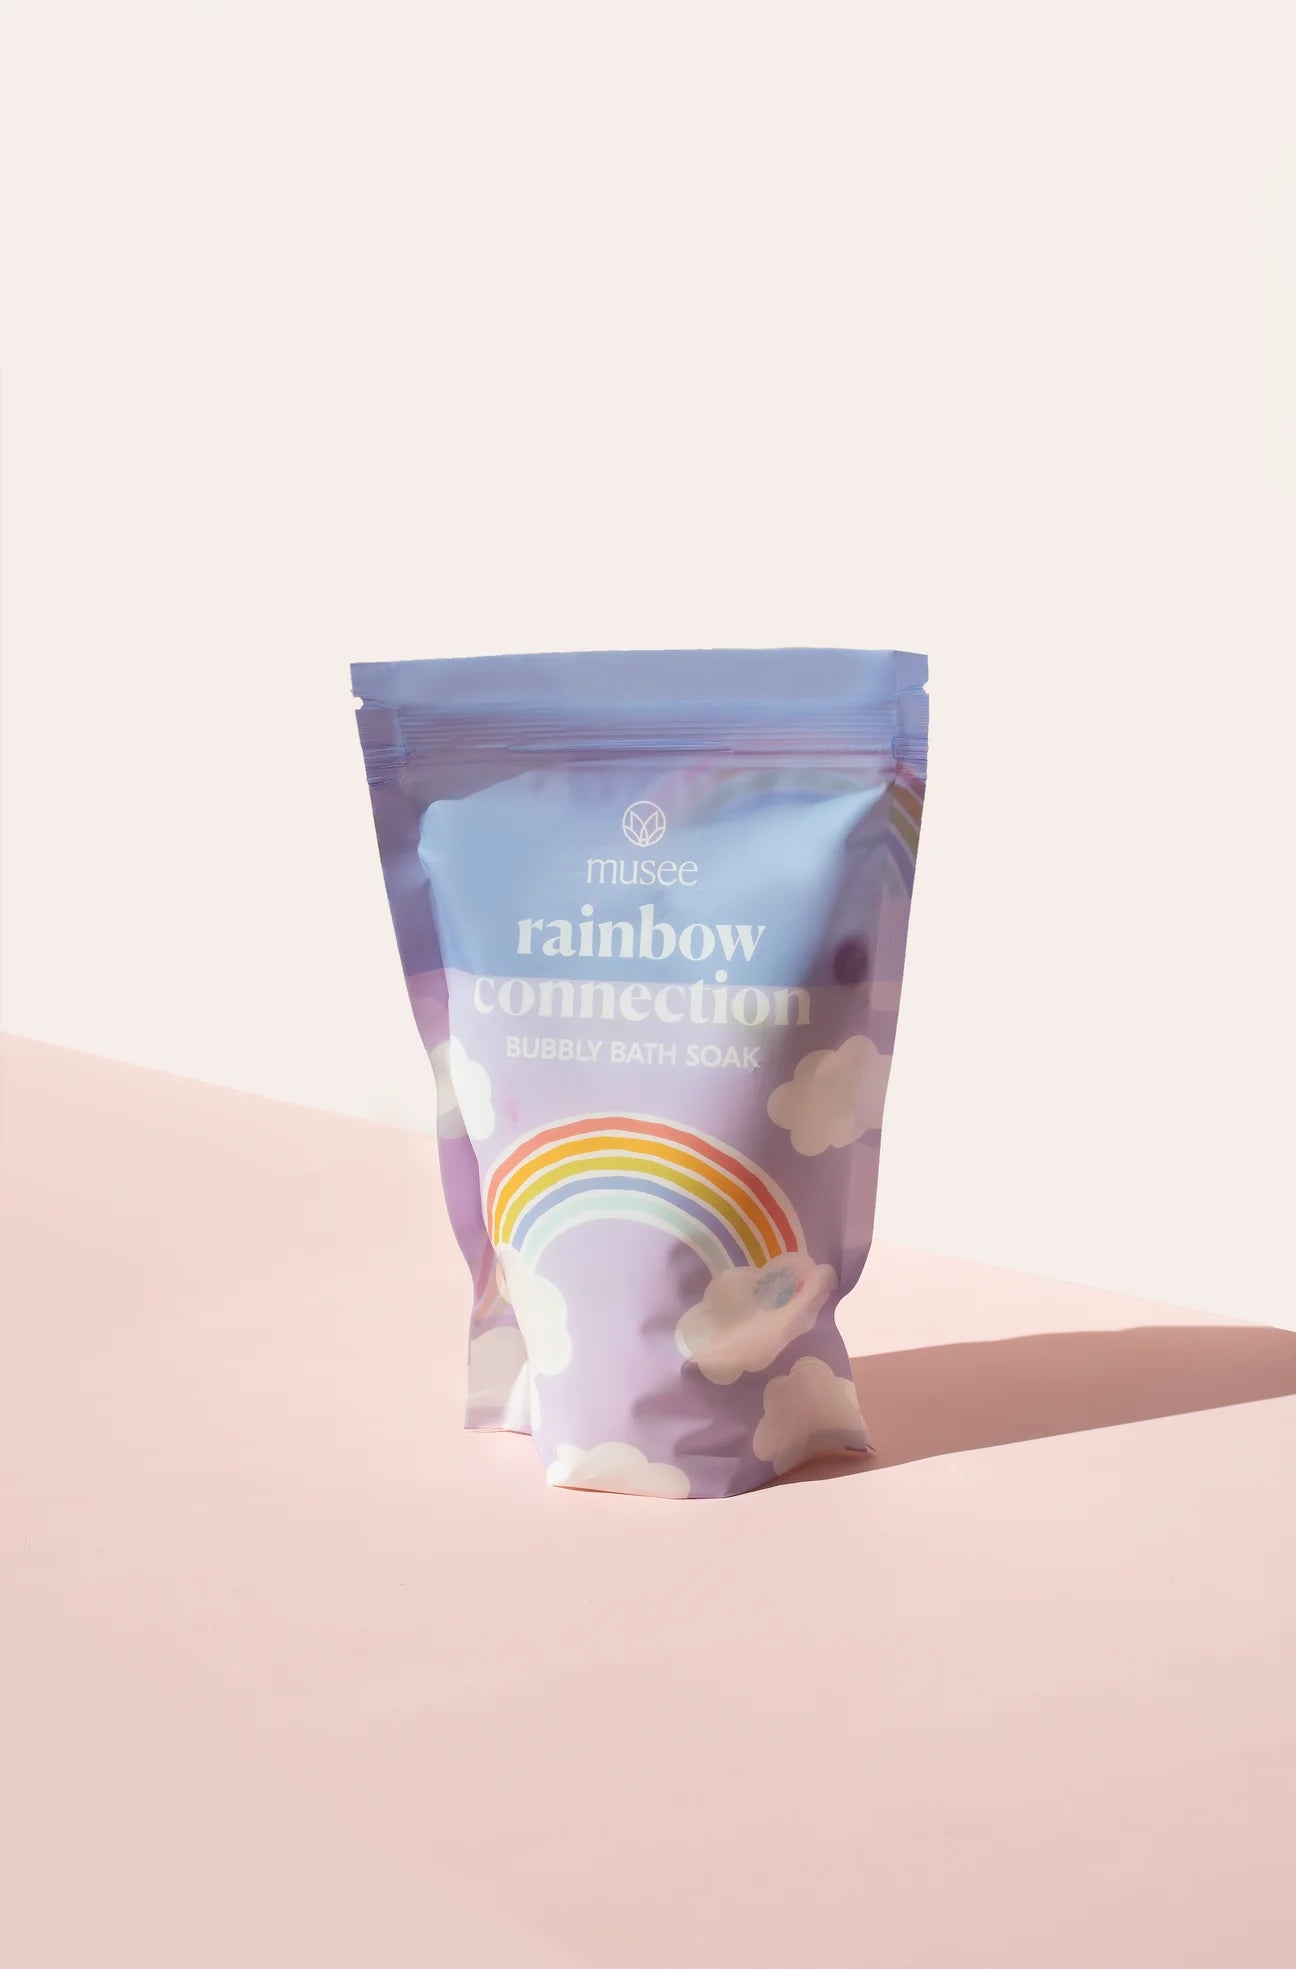 A bag of Rainbow Connection Bubbly Bath Soak by Musee on a vibrant pink background creates a magical oasis.